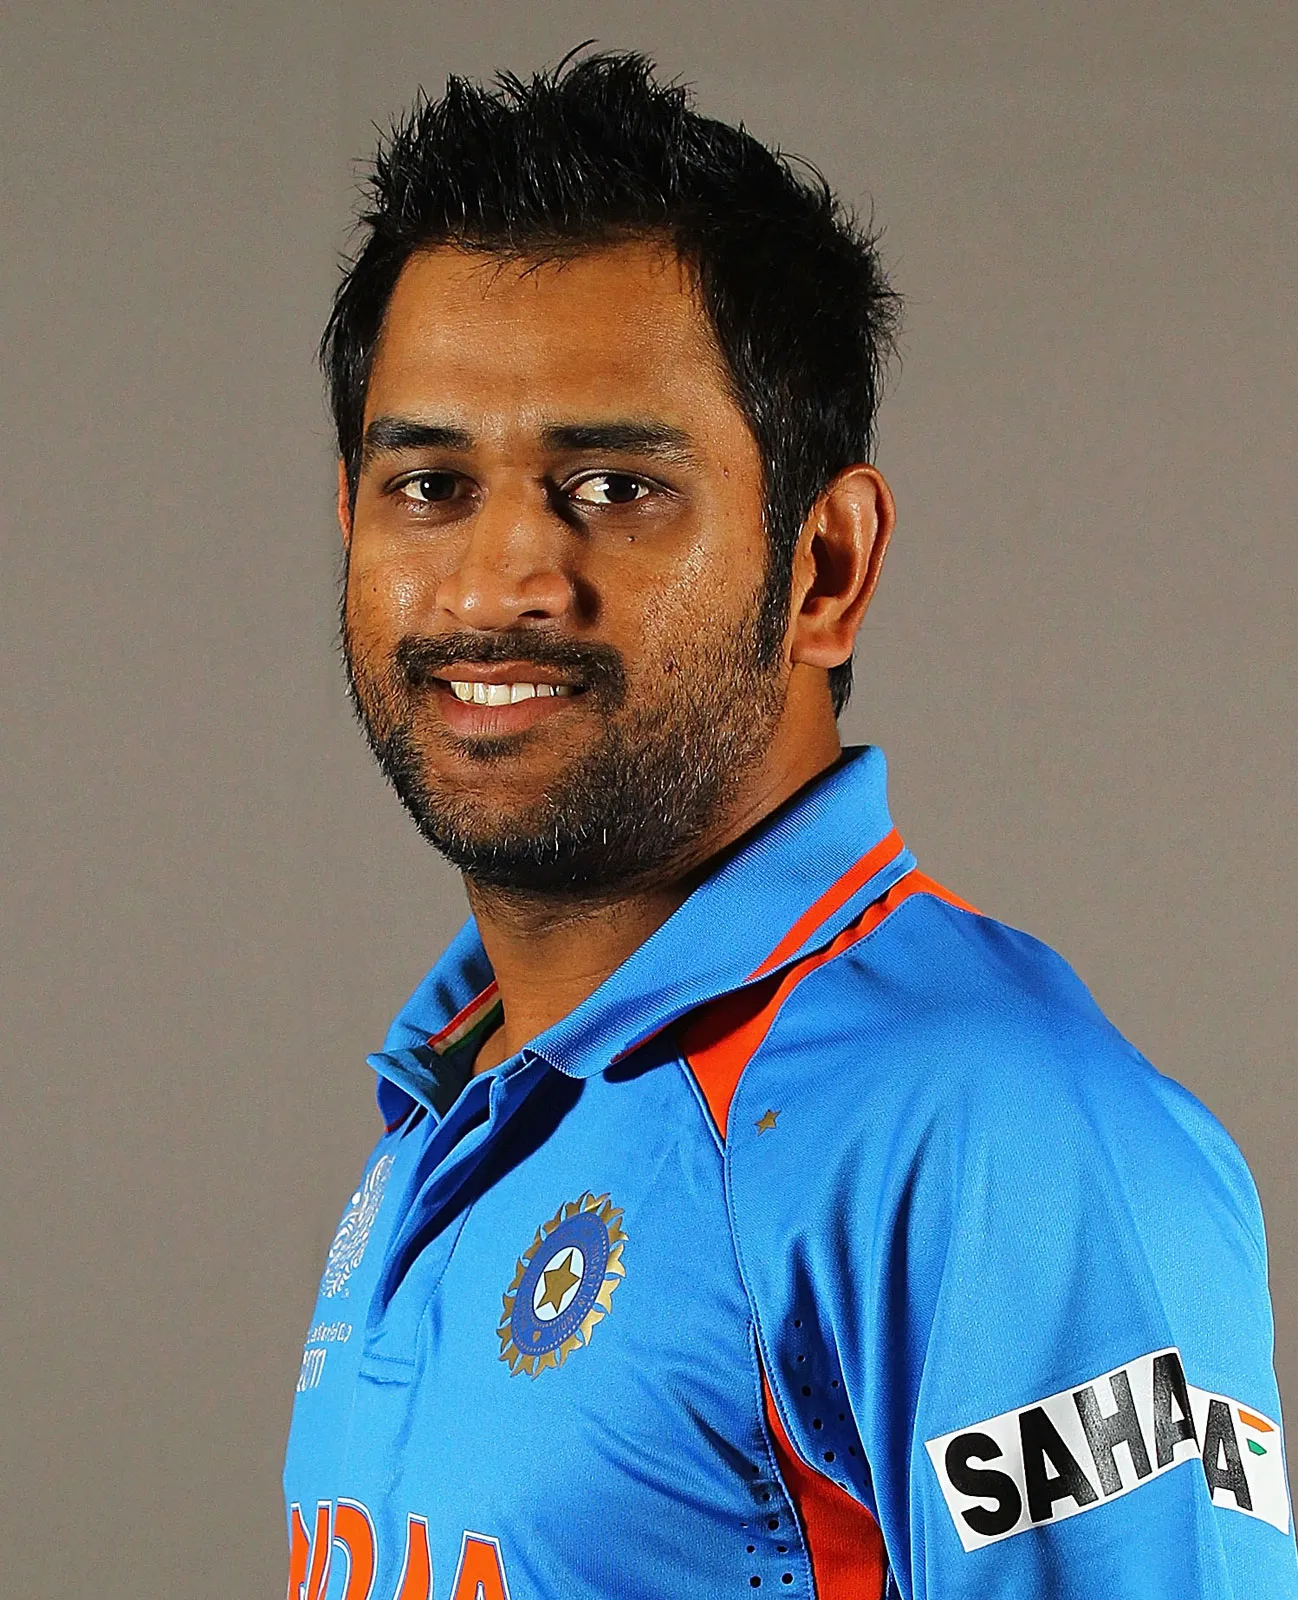 Ms Dhoni Biography / Biography of Indian Cricket Team Captain Mahendra Singh Dhoni